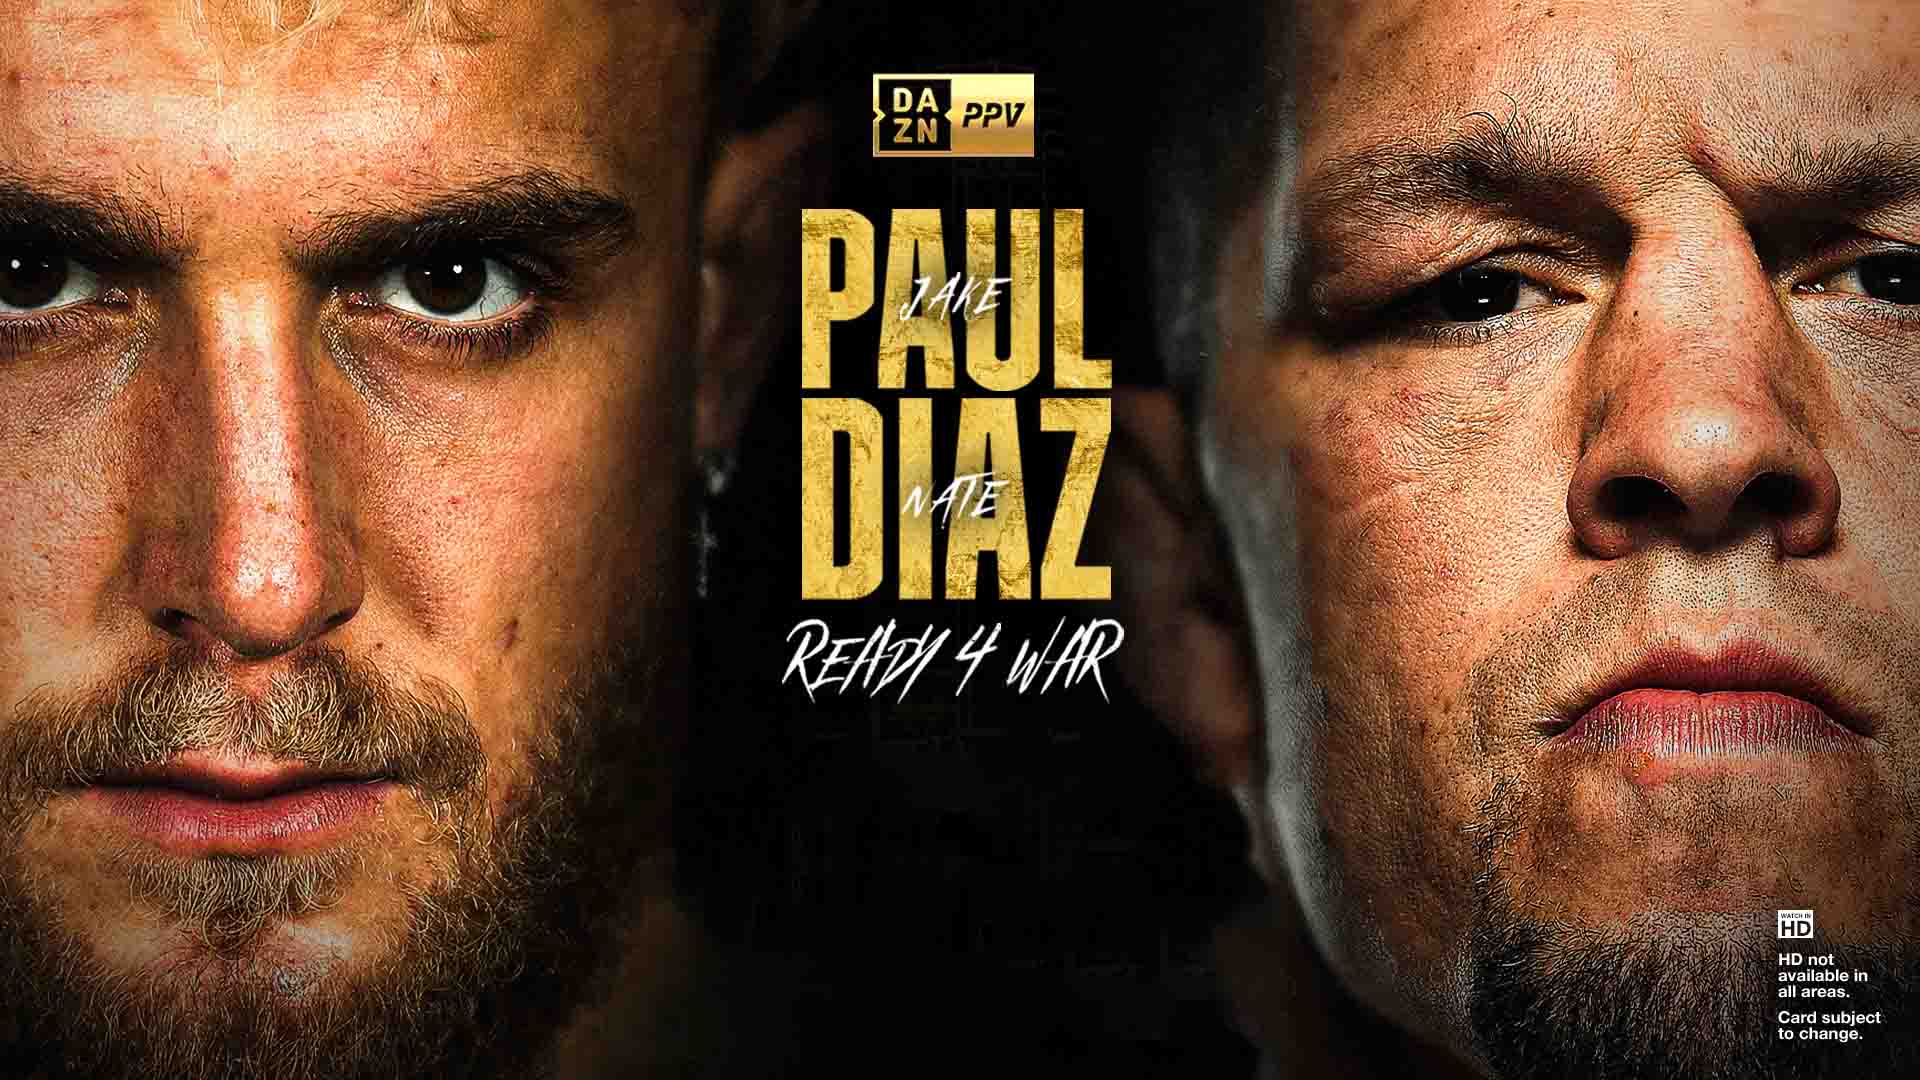 Jake Paul vs Nate Diaz Preview + How to Watch on Sling TV